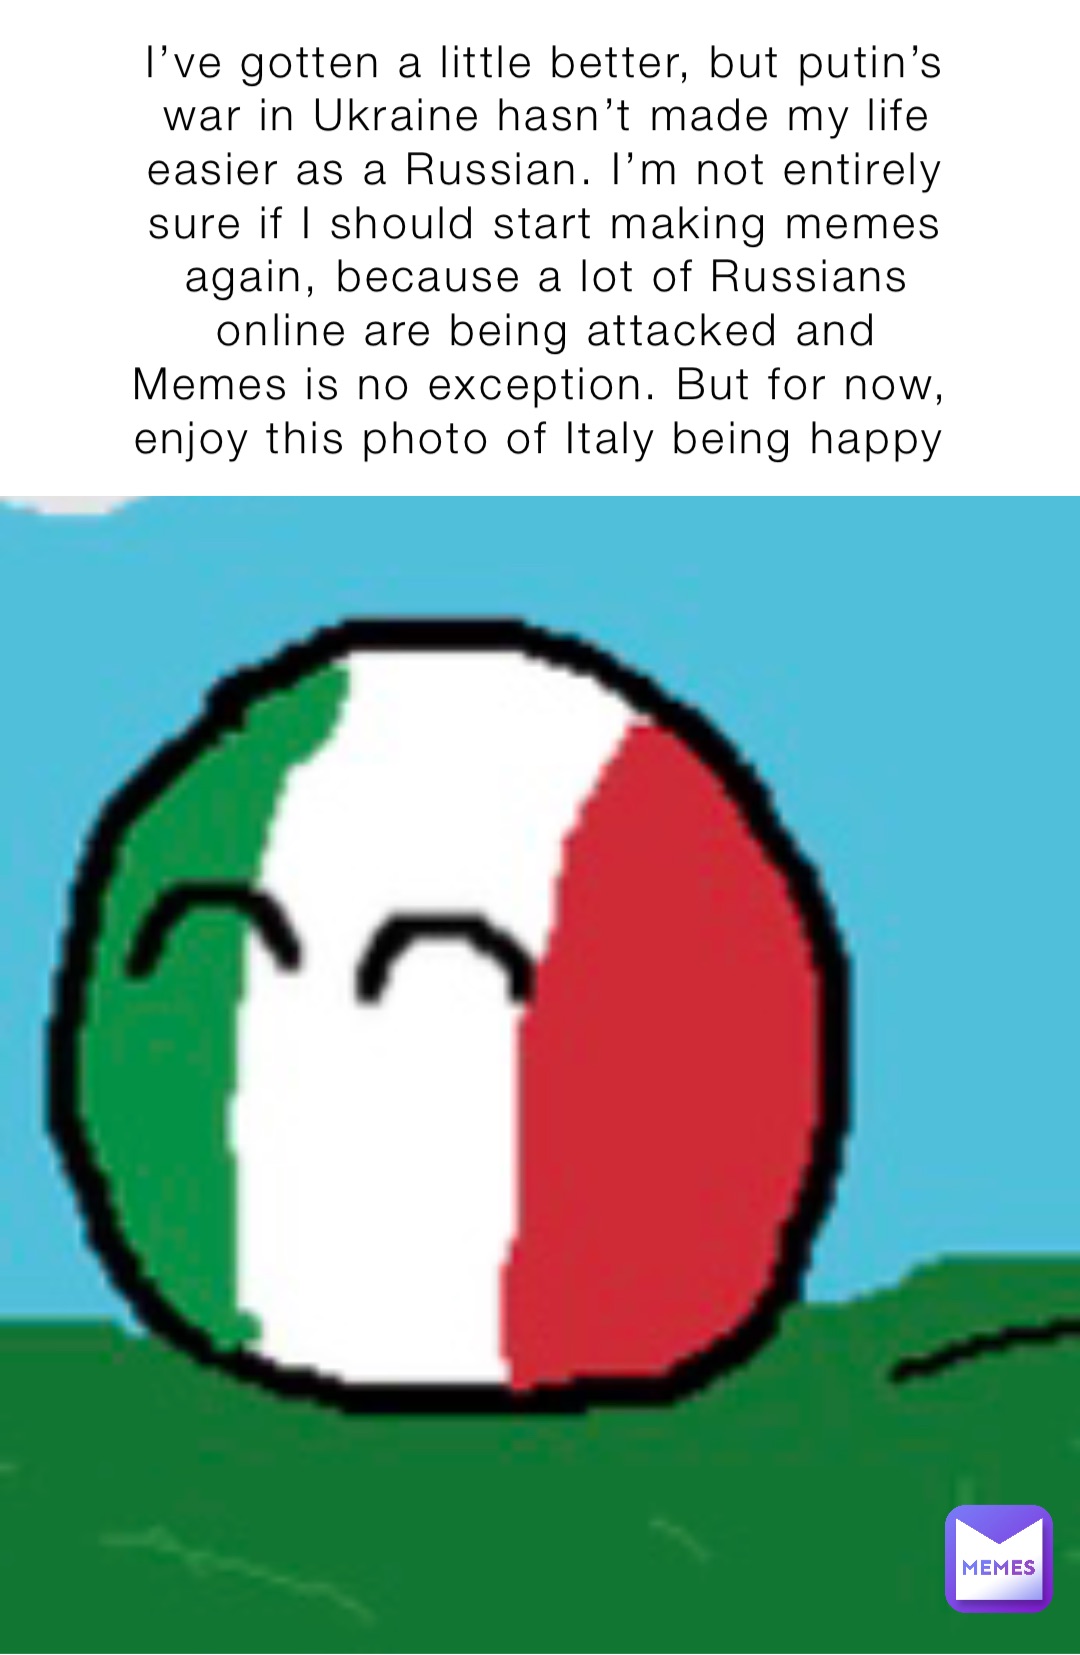 I’ve gotten a little better, but putin’s war in Ukraine hasn’t made my life easier as a Russian. I’m not entirely sure if I should start making memes again, because a lot of Russians online are being attacked and Memes is no exception. But for now, enjoy this photo of Italy being happy